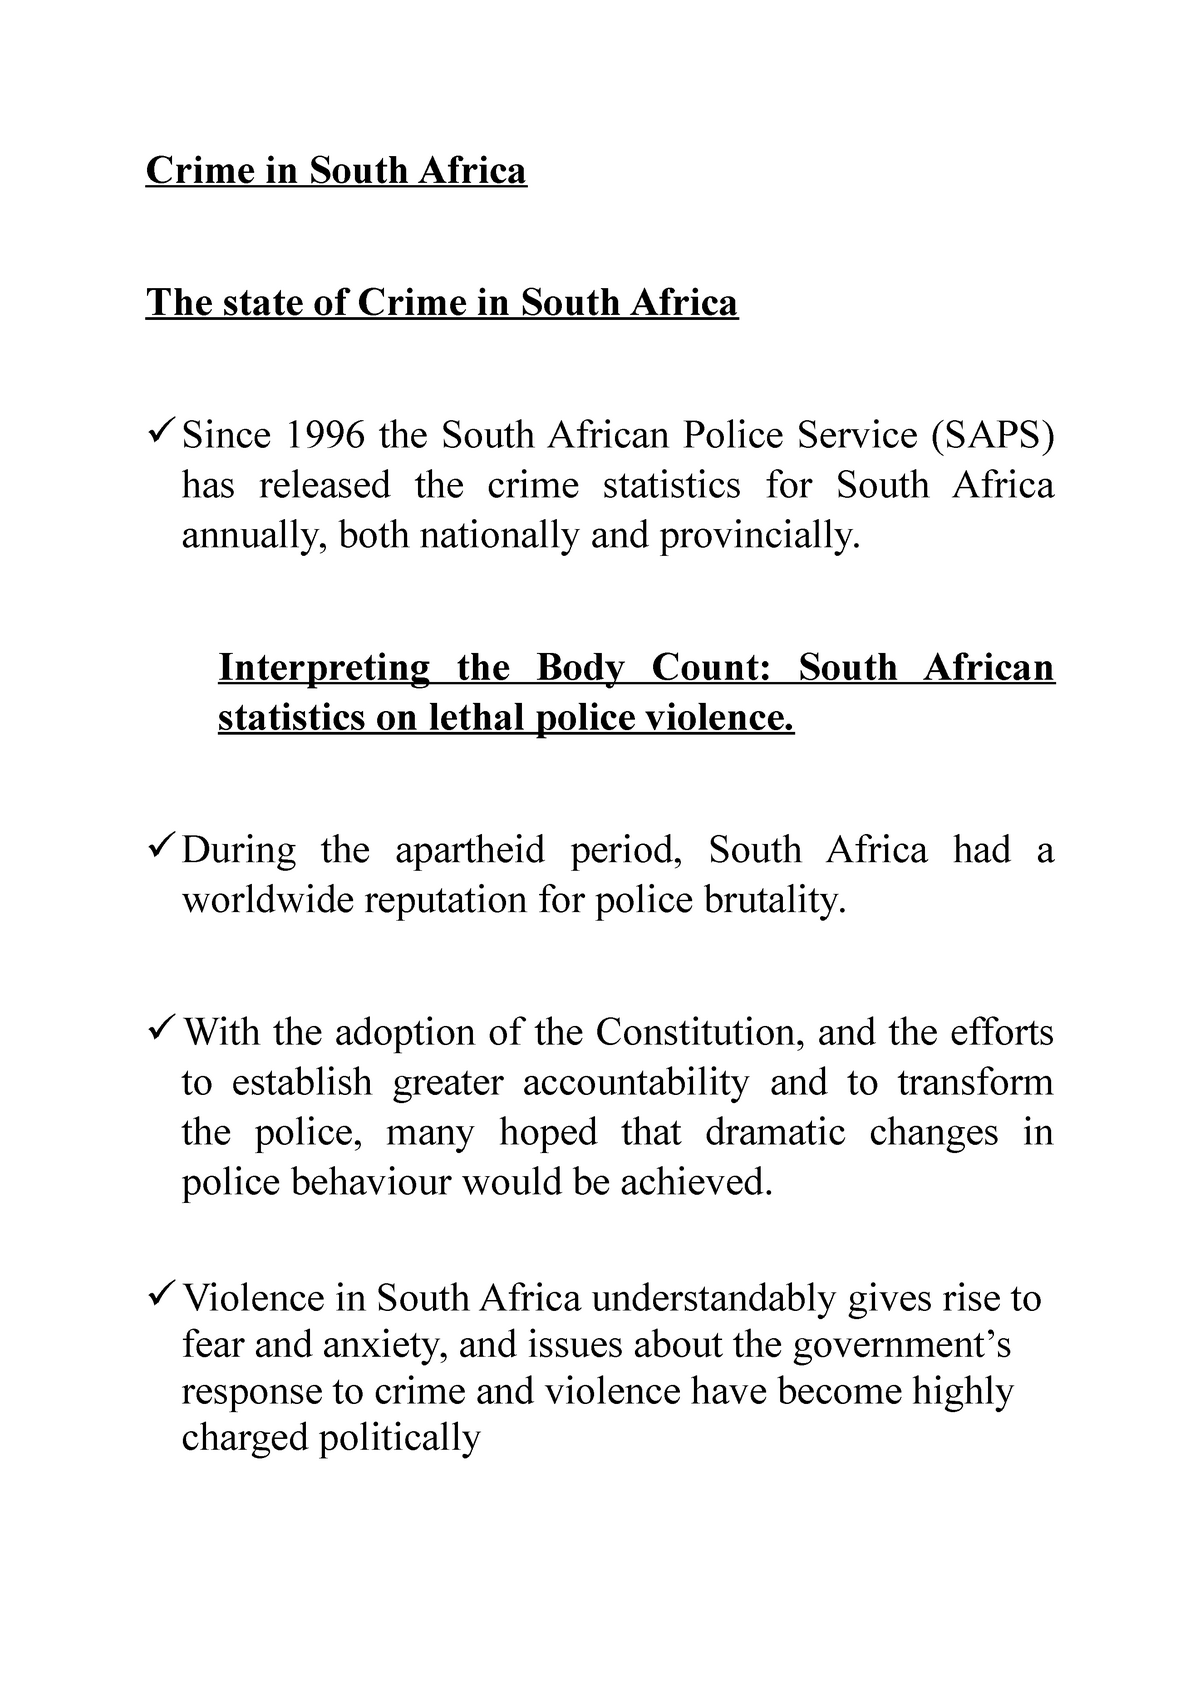 crime in south africa essay pdf